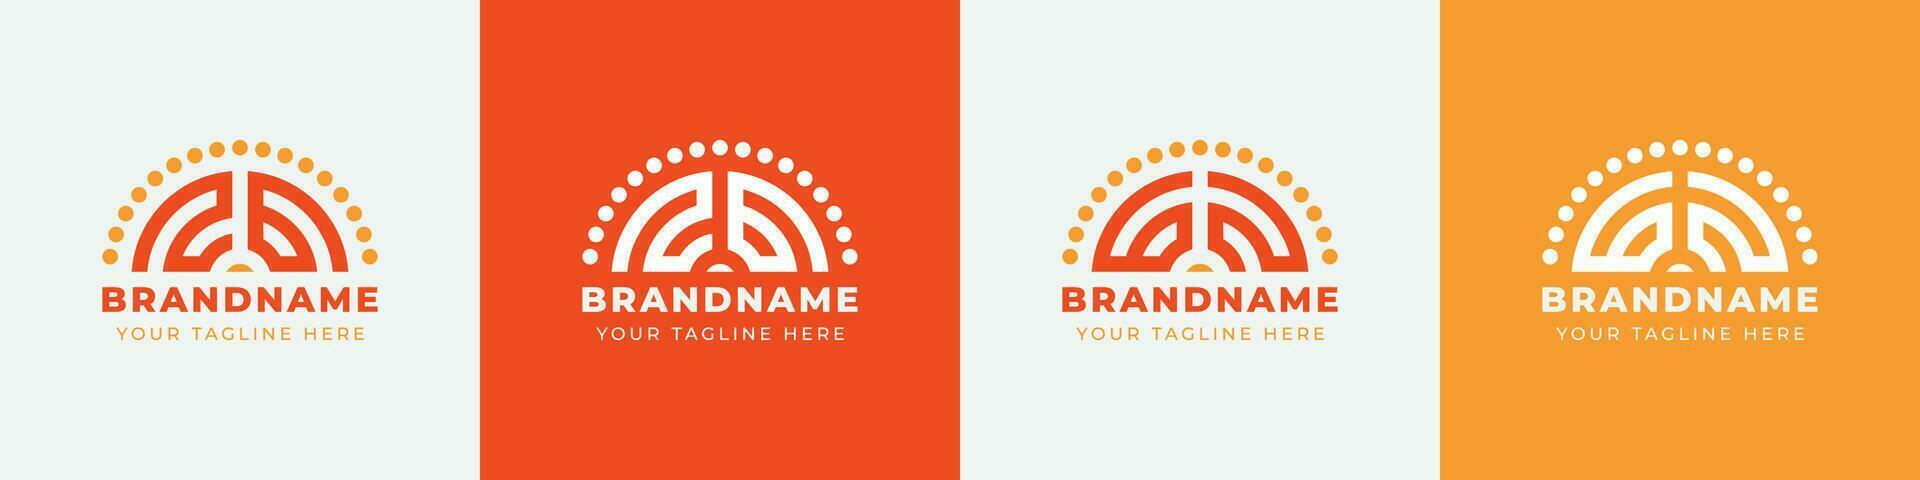 Letter GN and NG or GZ and ZG Sunrise  Logo Set, suitable for any business with GN, NG, GZ, ZG initials. vector